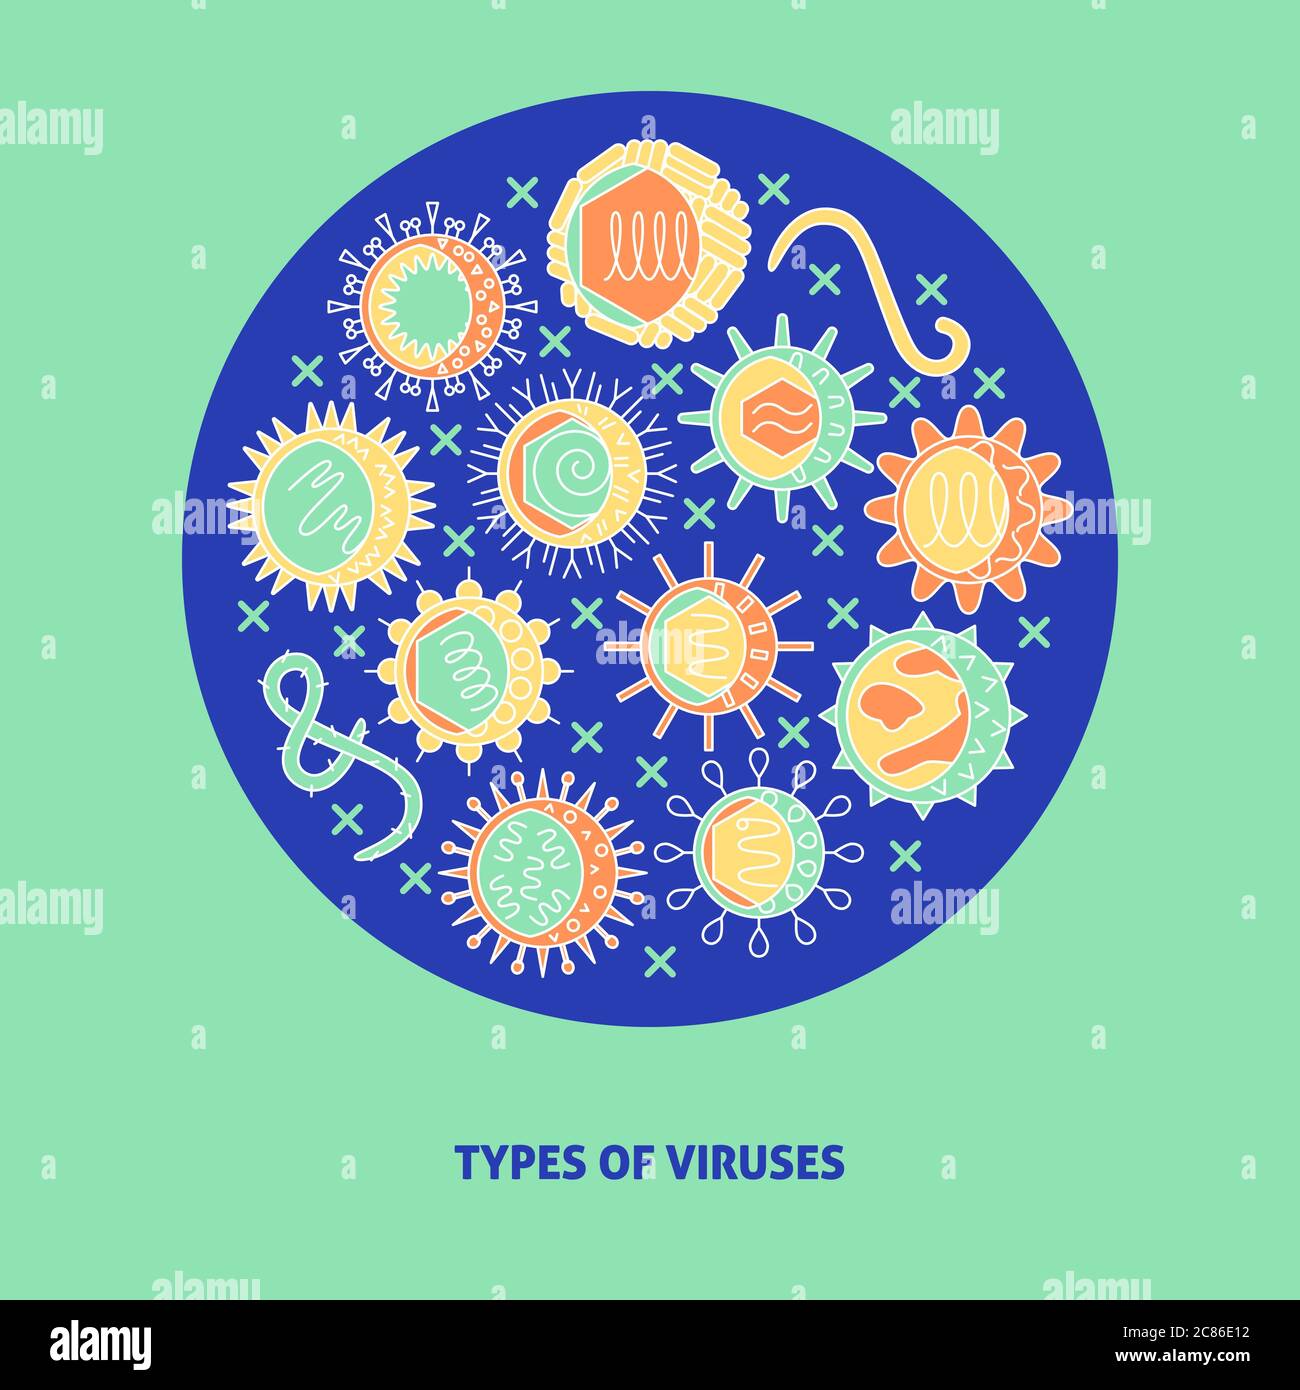 Types of human viruses poster with place for text. Microbiology banner with infection cells symbols collection. Vector illustration. Stock Vector